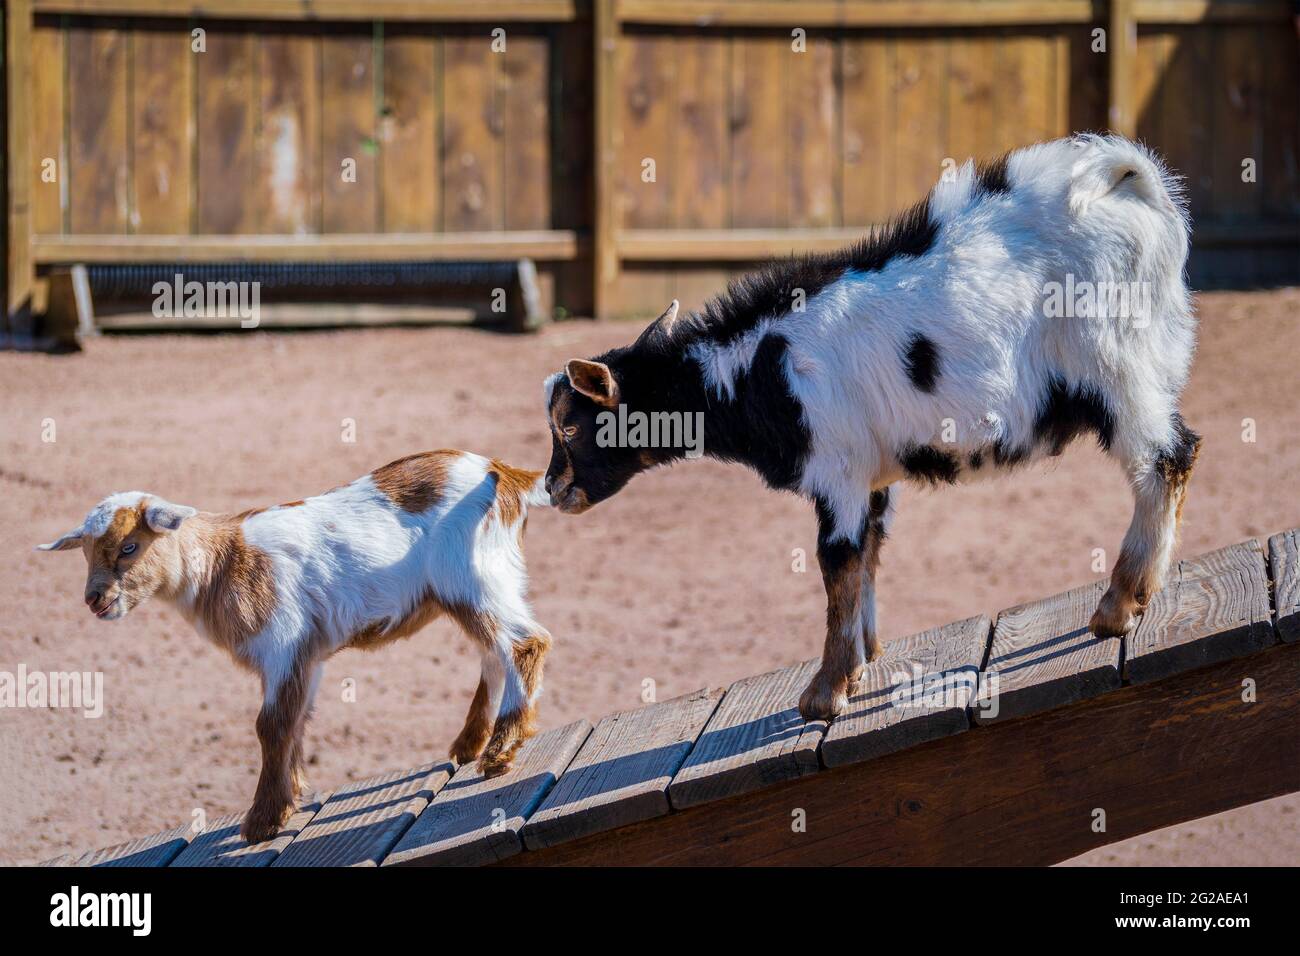 Two African Pygmy Goats are Walking Down a Wooden Deck in a Barn Stock Photo